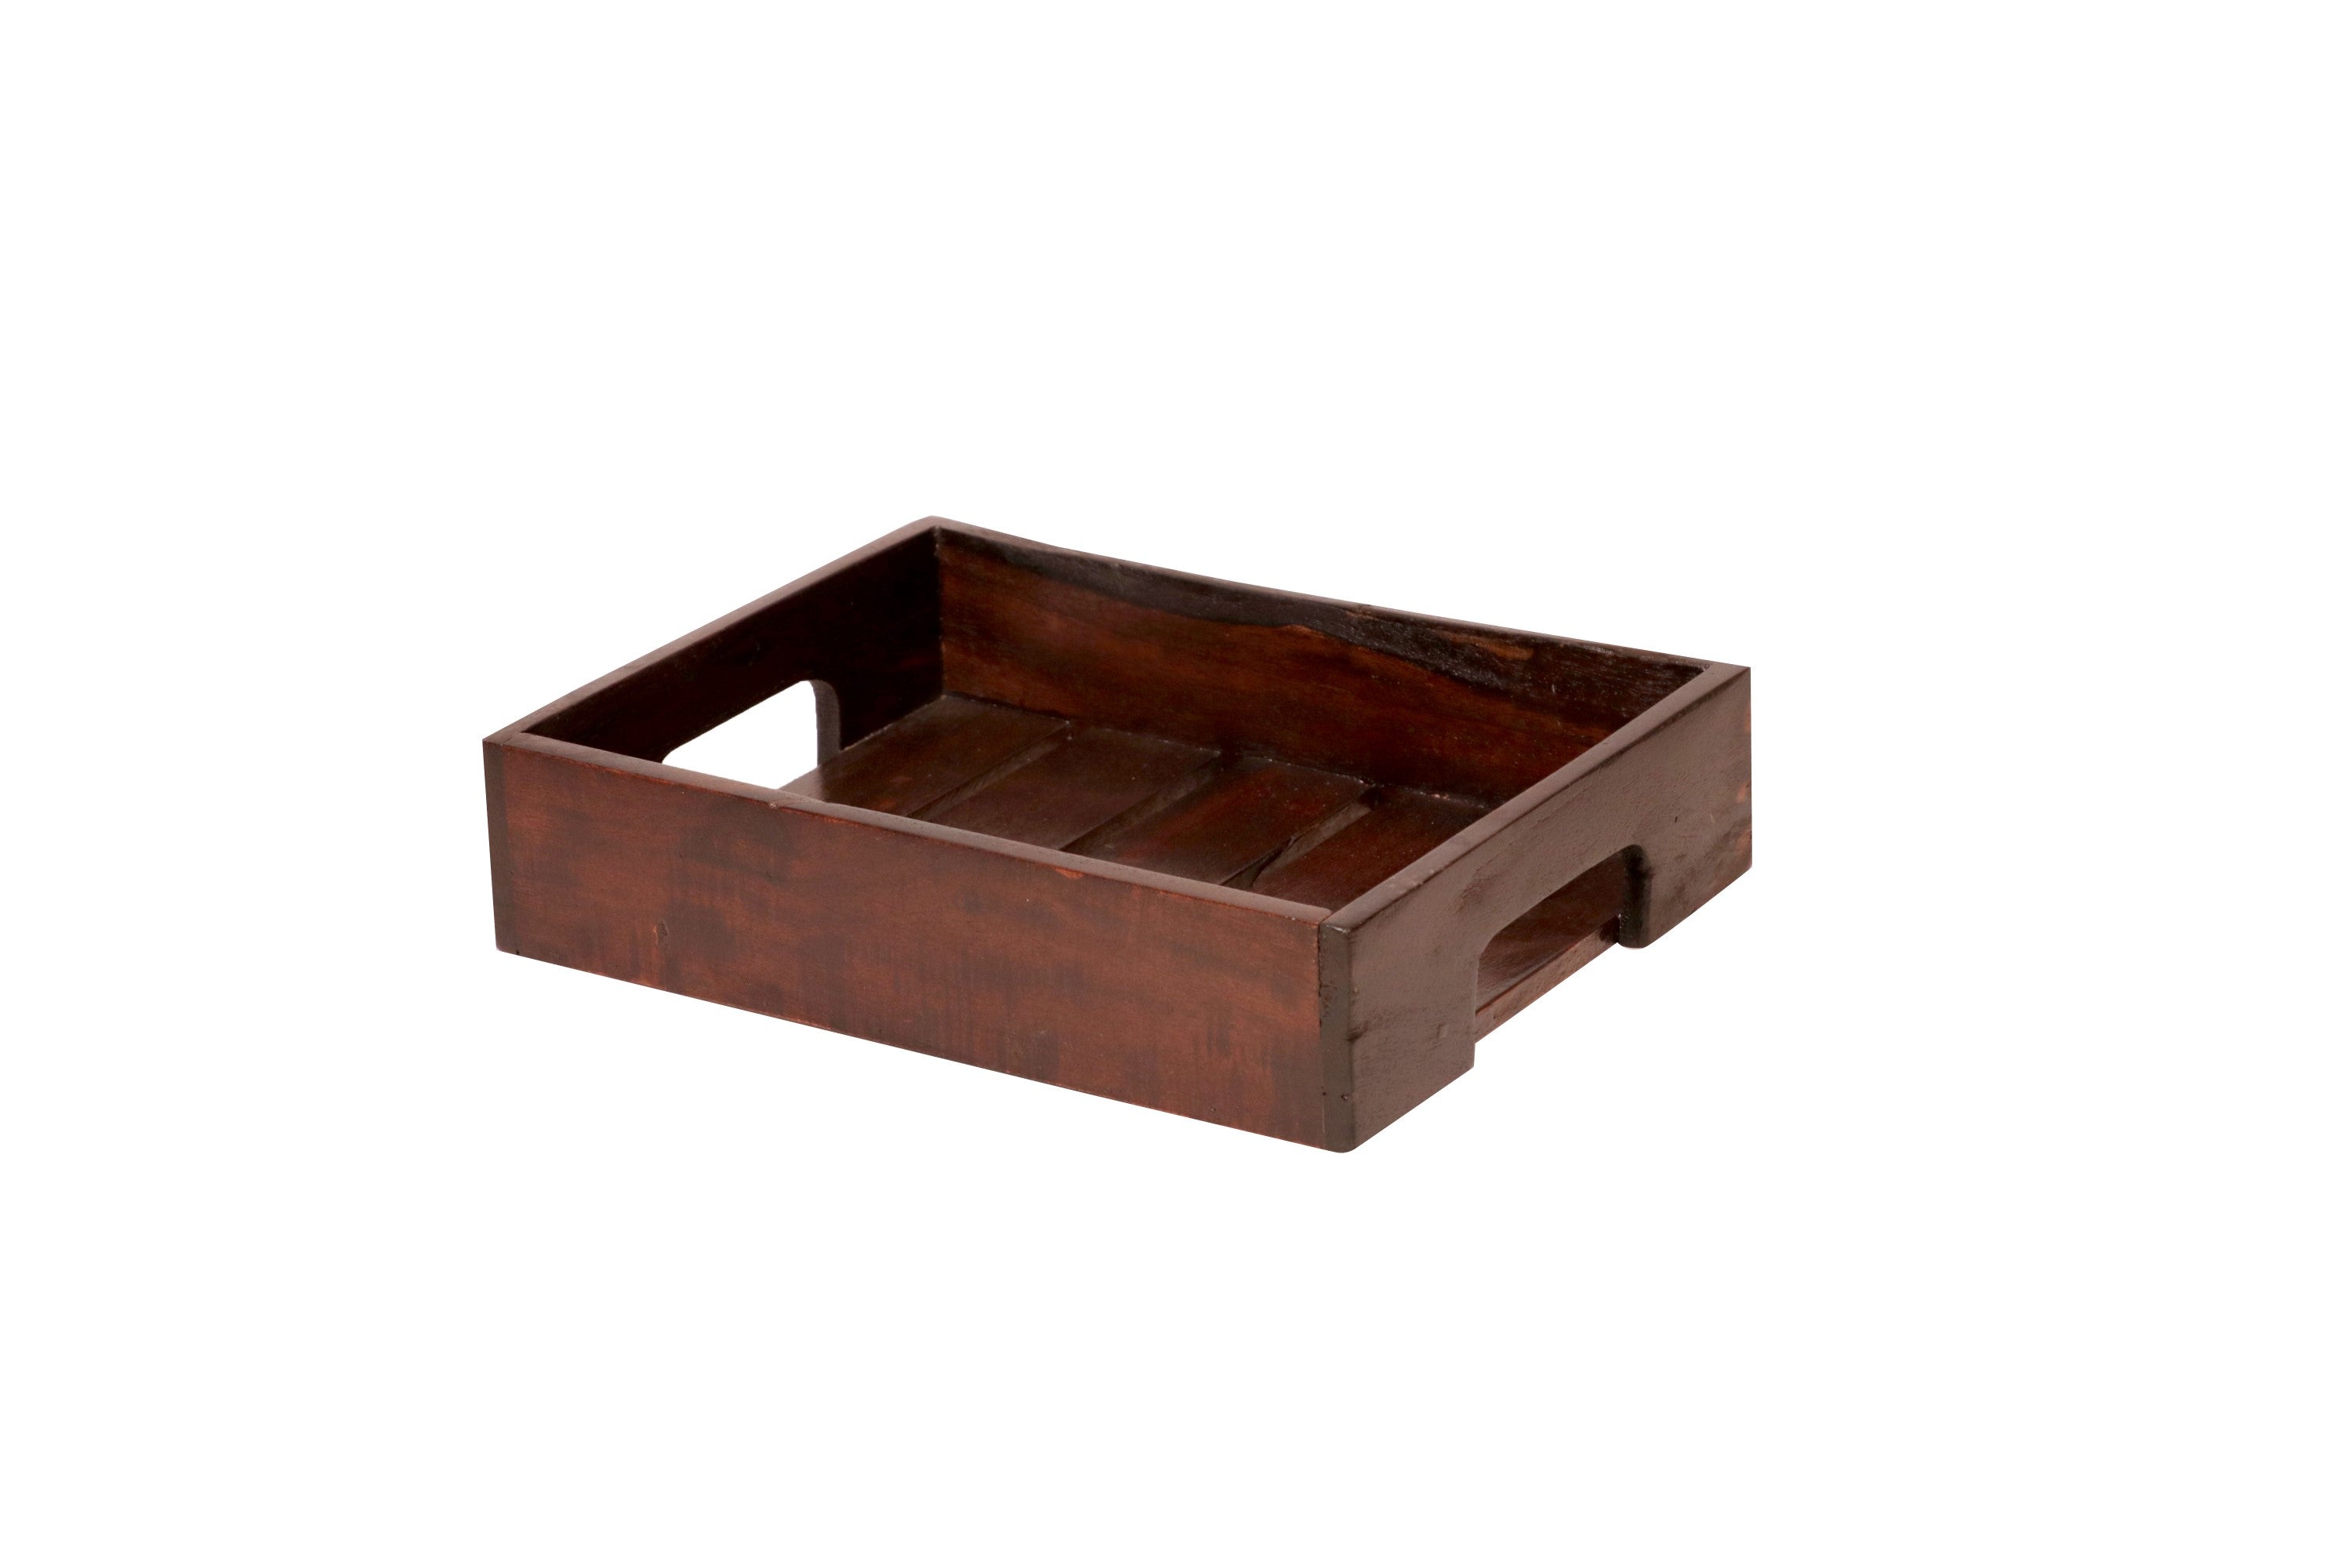 Compact wooden tray Tray